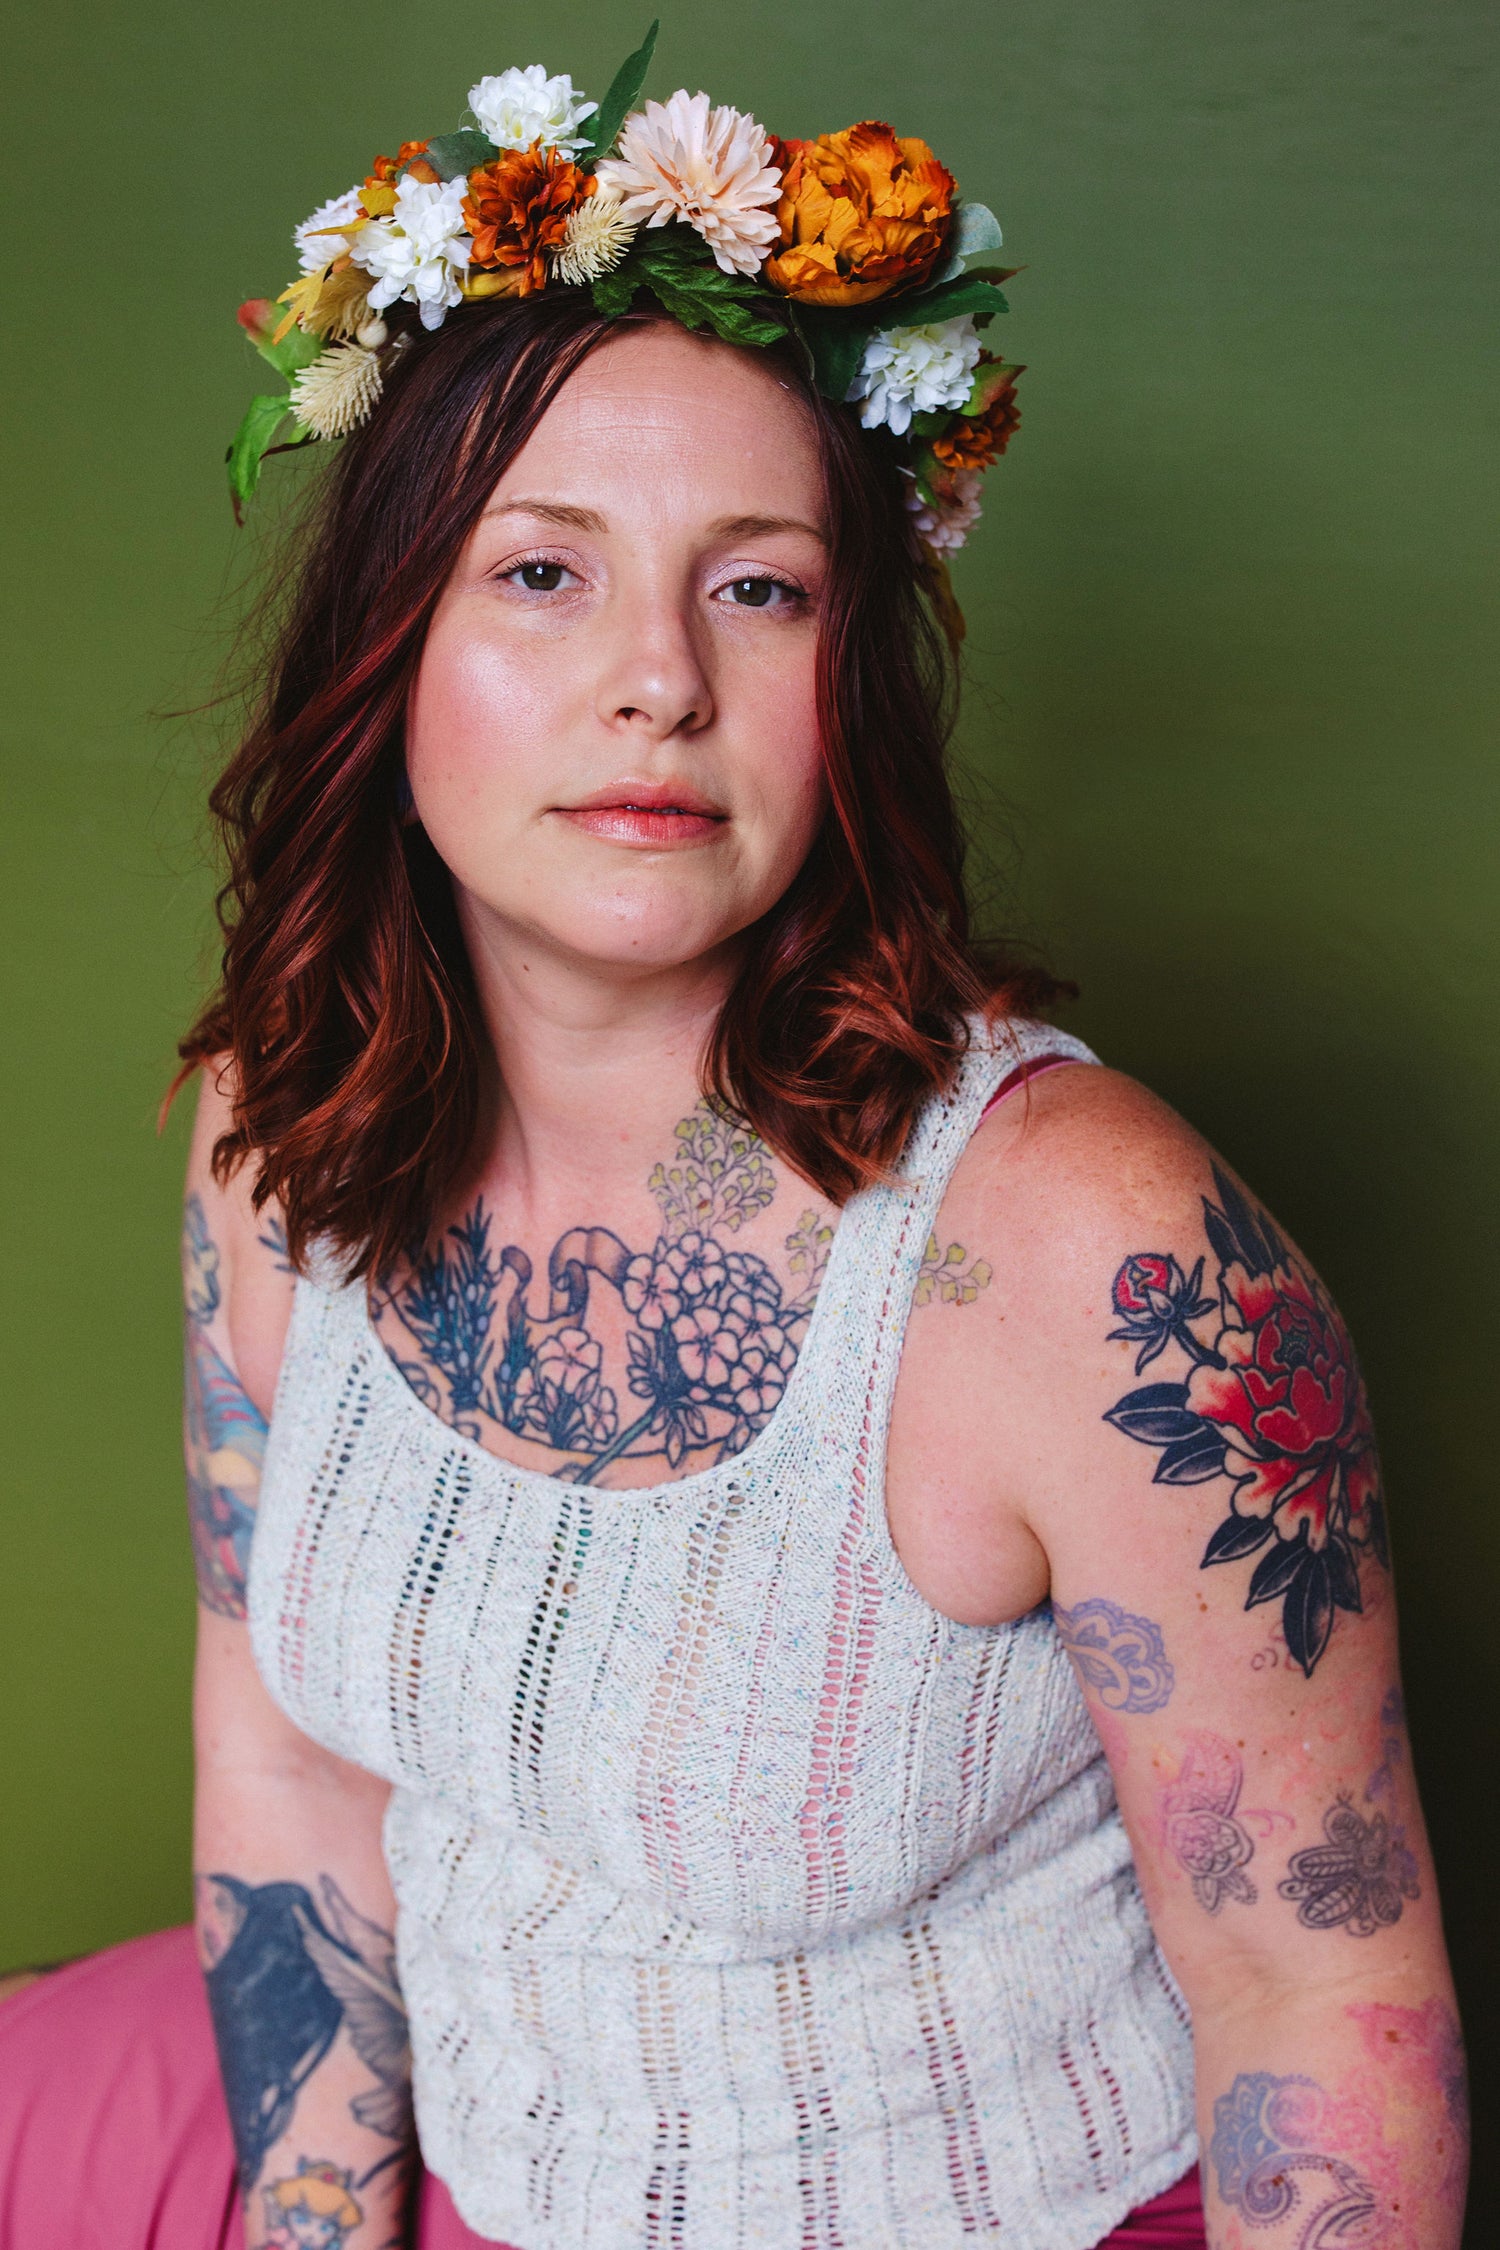 Bess wears a handknit tank and a flower crown. This knitting pattern features a tailored fit and bust darts.